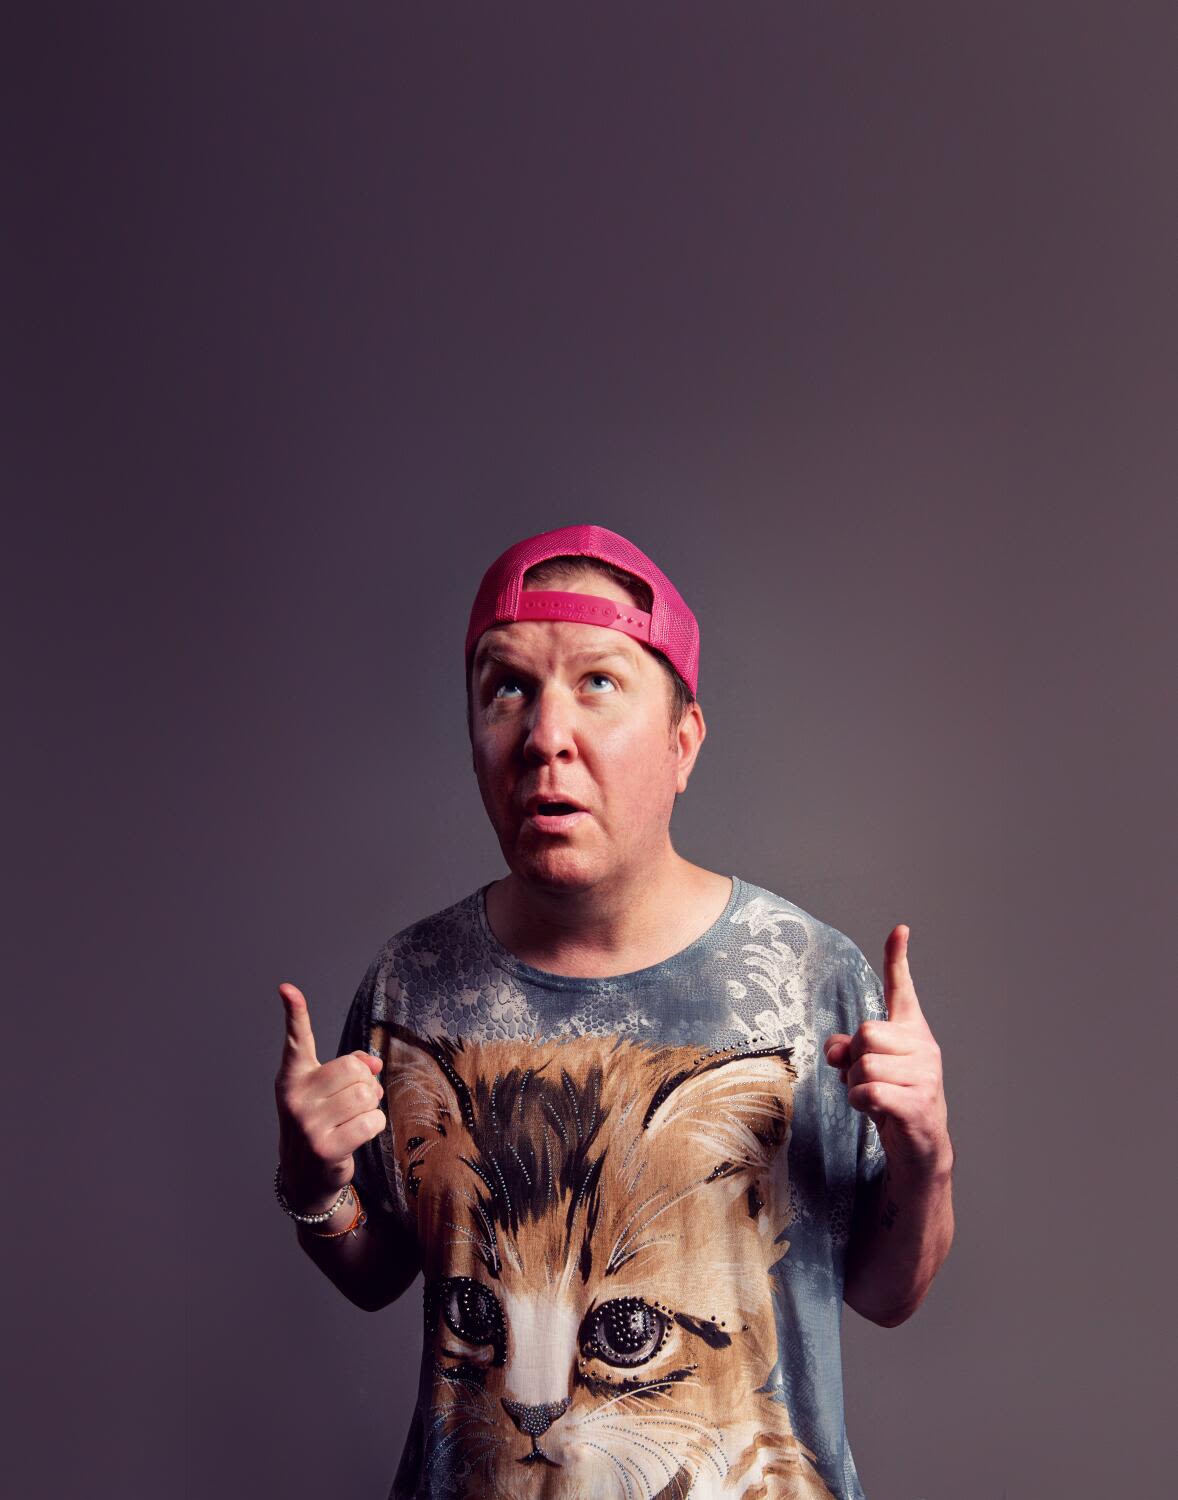 Comedian Nick Swardson flushes out new jokes at the Roosevelt Hotel ahead of his Toilet Head Tour